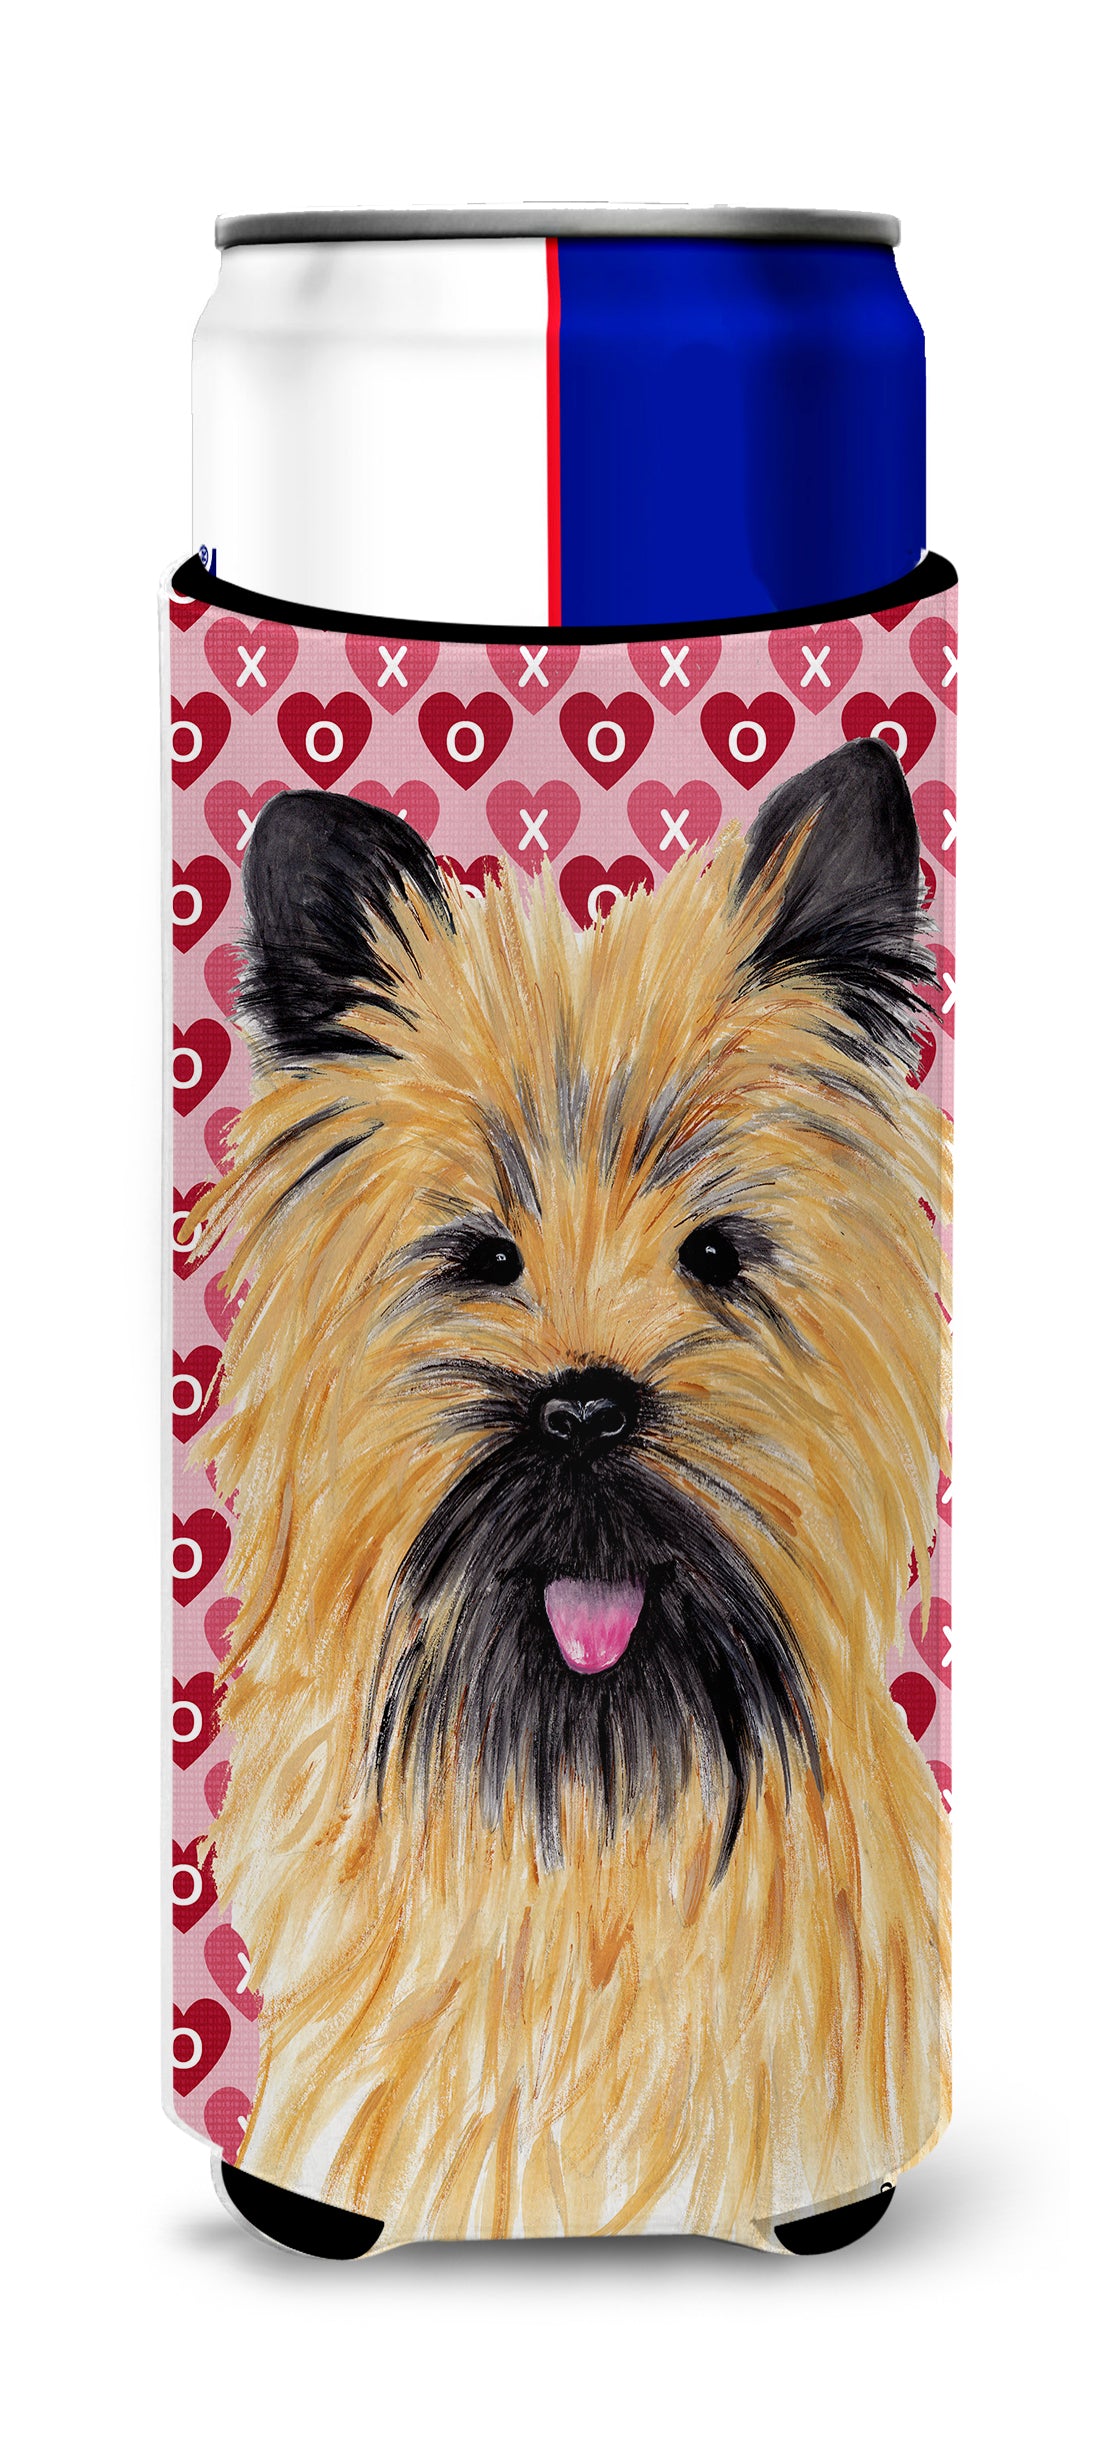 Cairn Terrier Hearts Love and Valentine's Day Portrait Ultra Beverage Insulators for slim cans SC9264MUK.